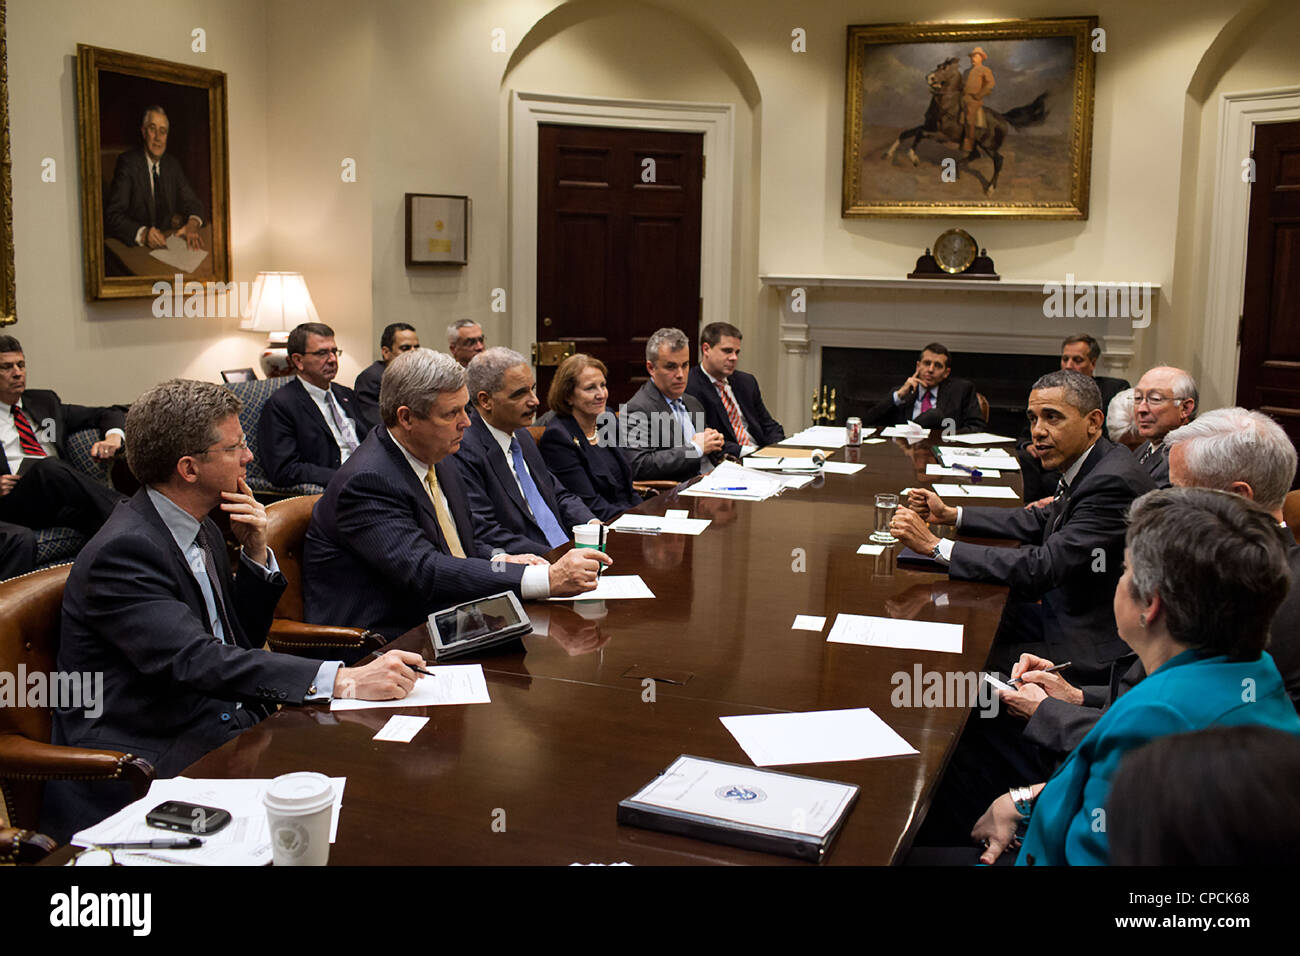 President Barack Obama Drops By A Meeting With Cabinet Members In